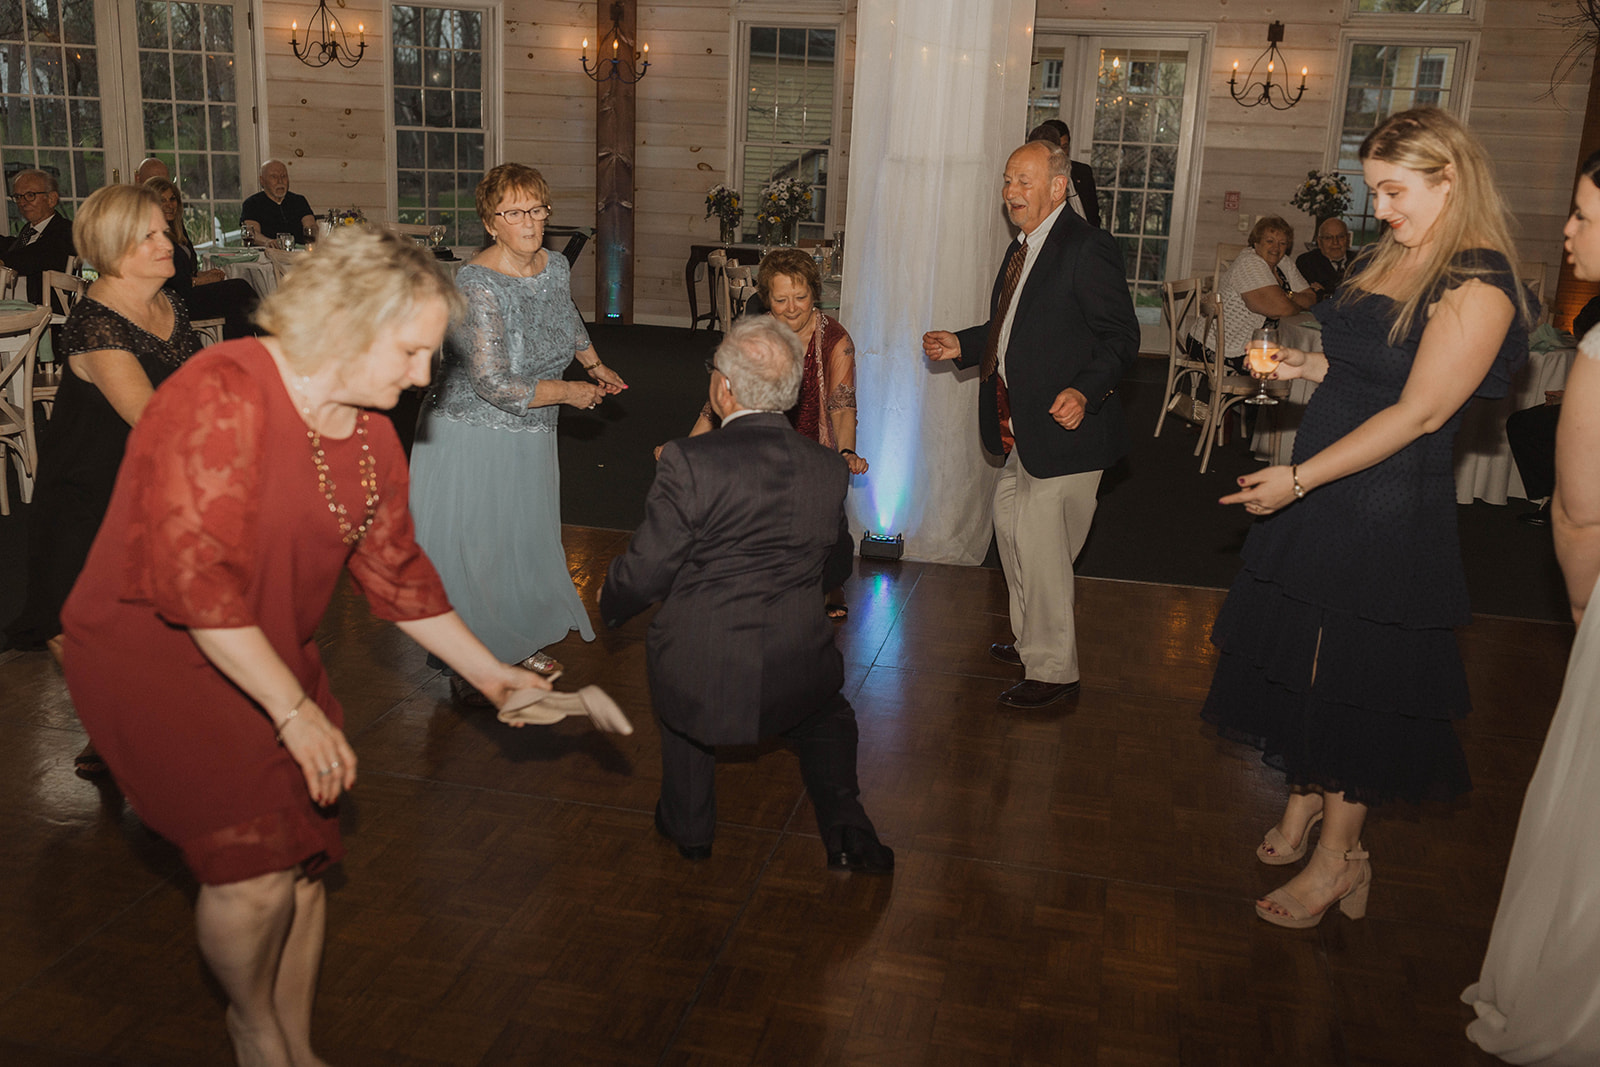 Guests show their dance moves at this dreamy upstate New York wedding